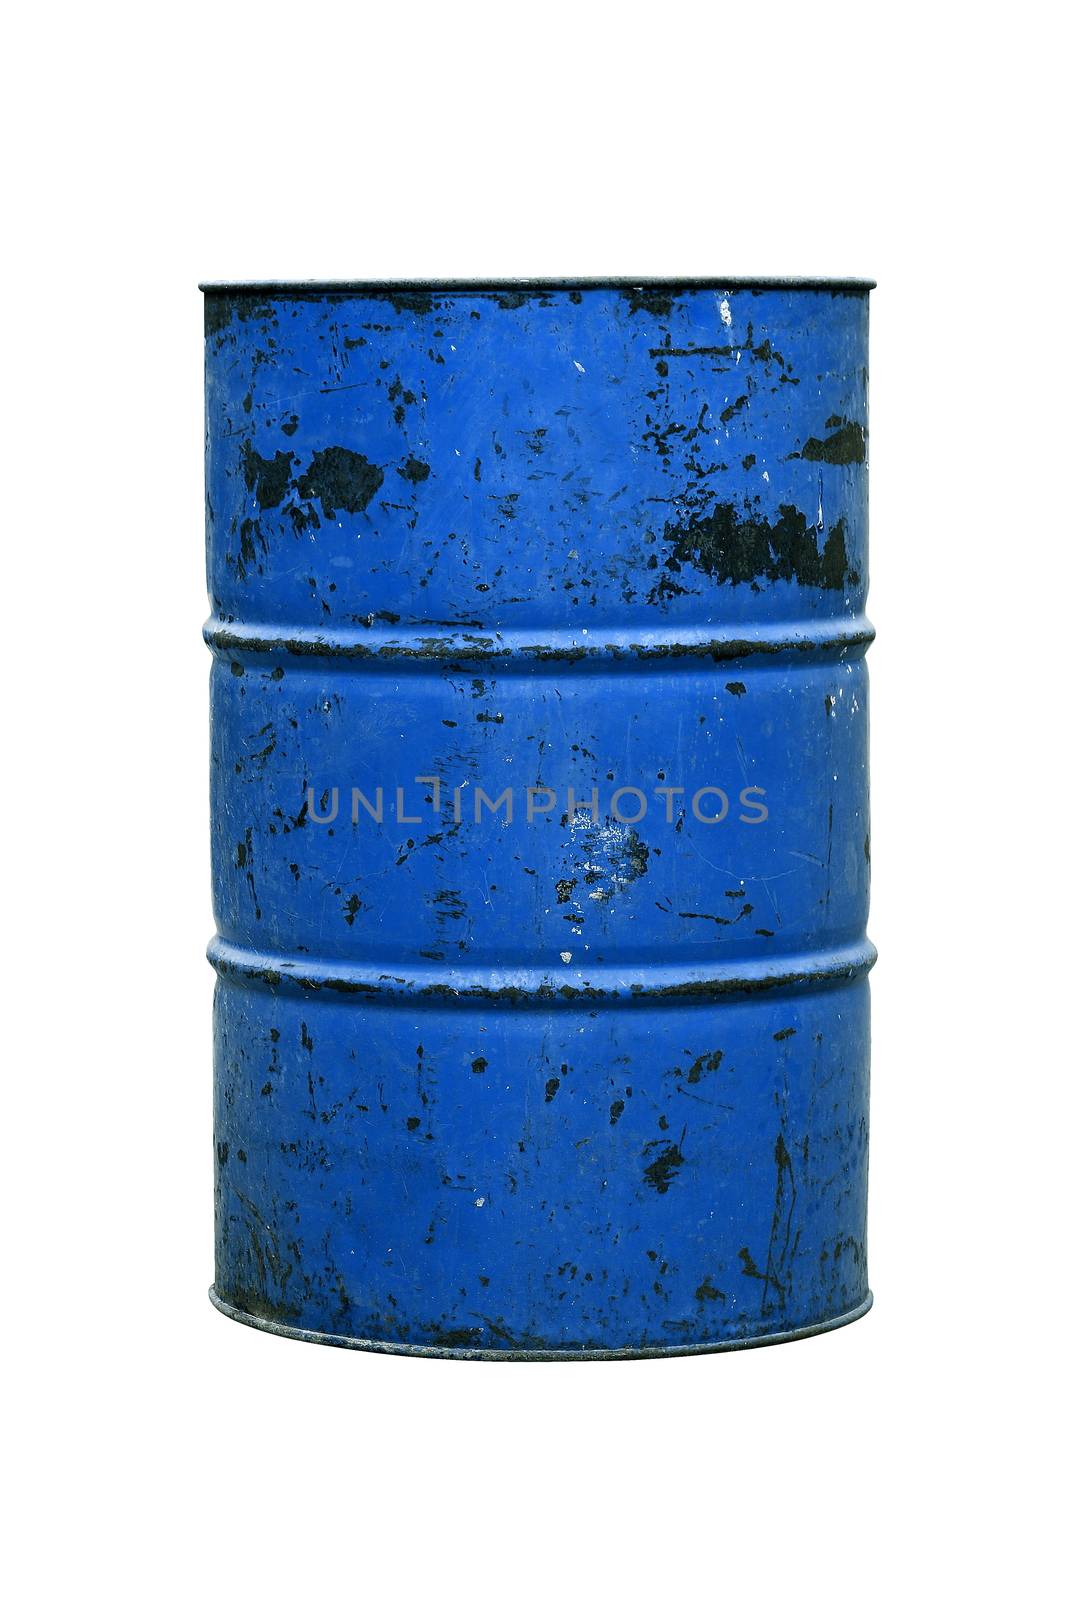 Barrel Oil blue dark Old isolated on background white by cgdeaw